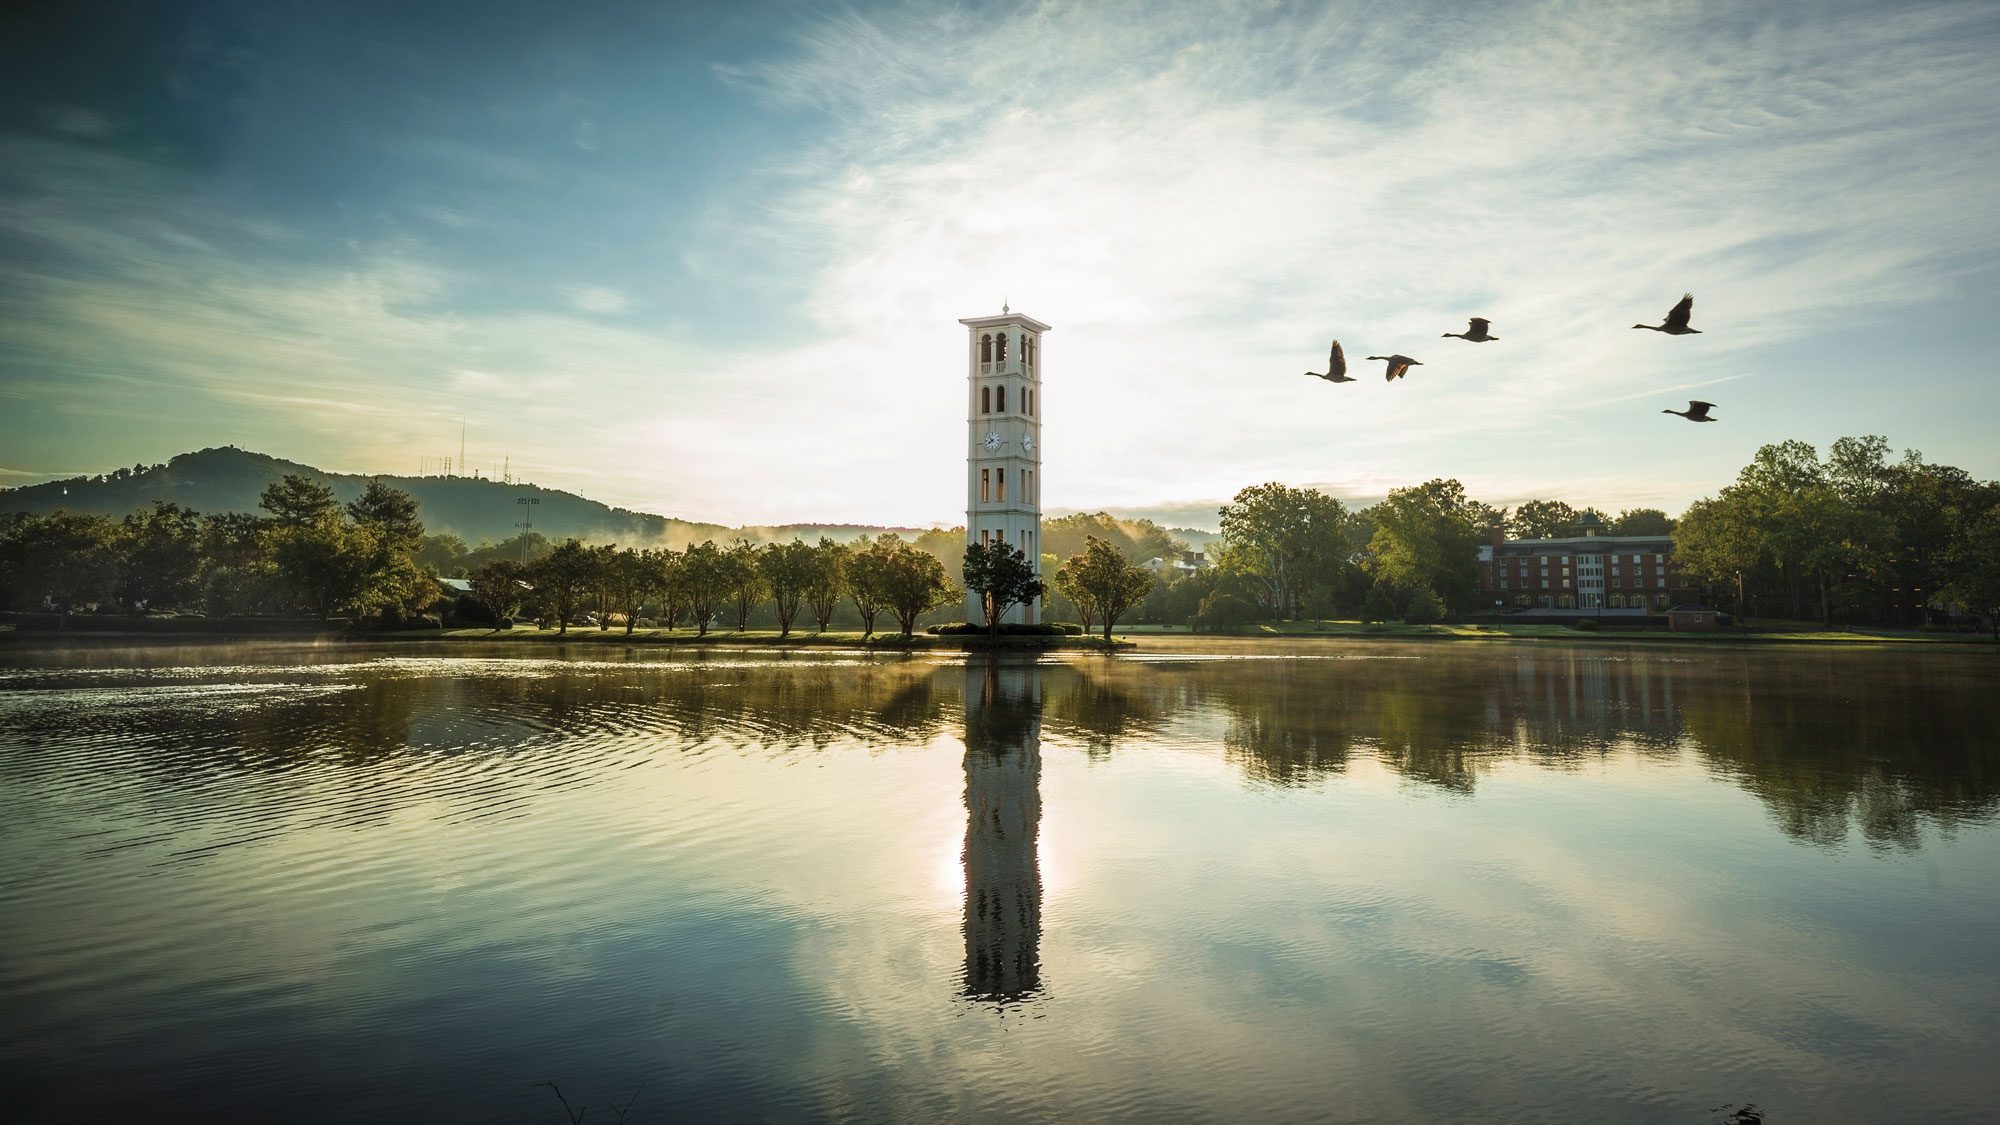 Furman Bell tower with birds flying overhead